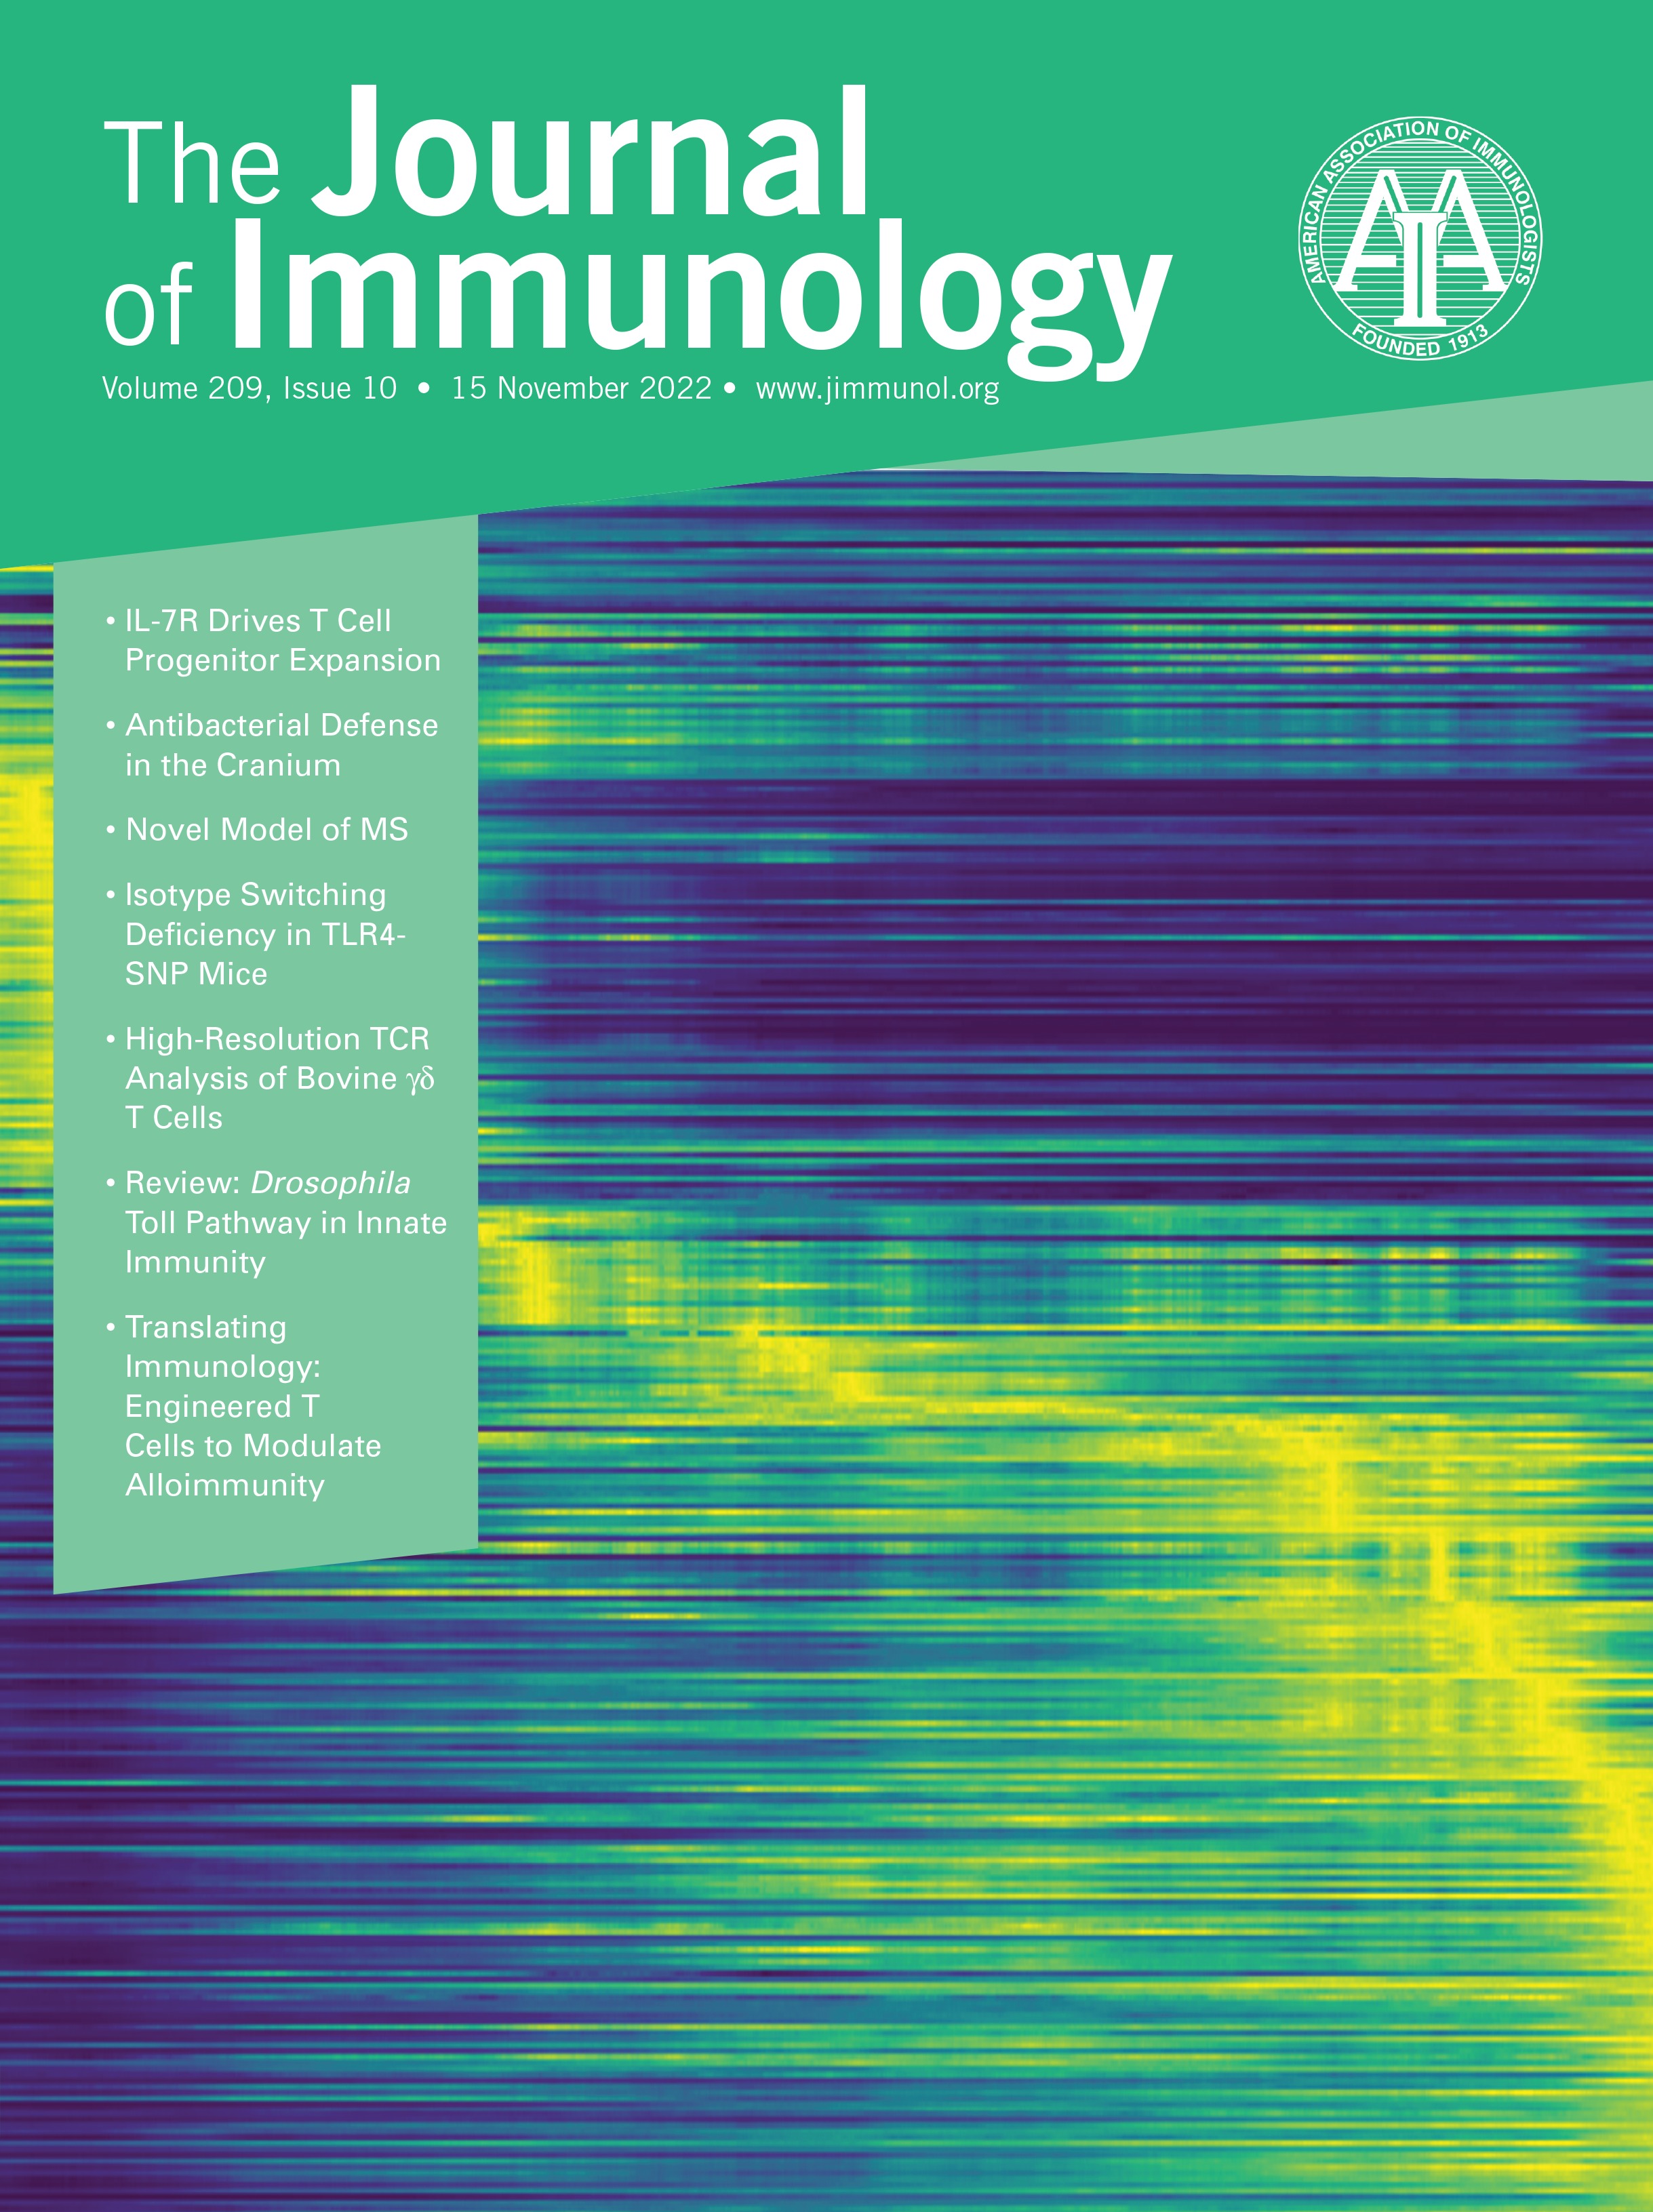 Cutting Edge: High-Dose Live Attenuated Influenza Vaccines Elicit Pulmonary Tissue-Resident Memory CD8+ T Cells in the Face of Pre-Existing Humoral Immunity [CUTTING EDGE]